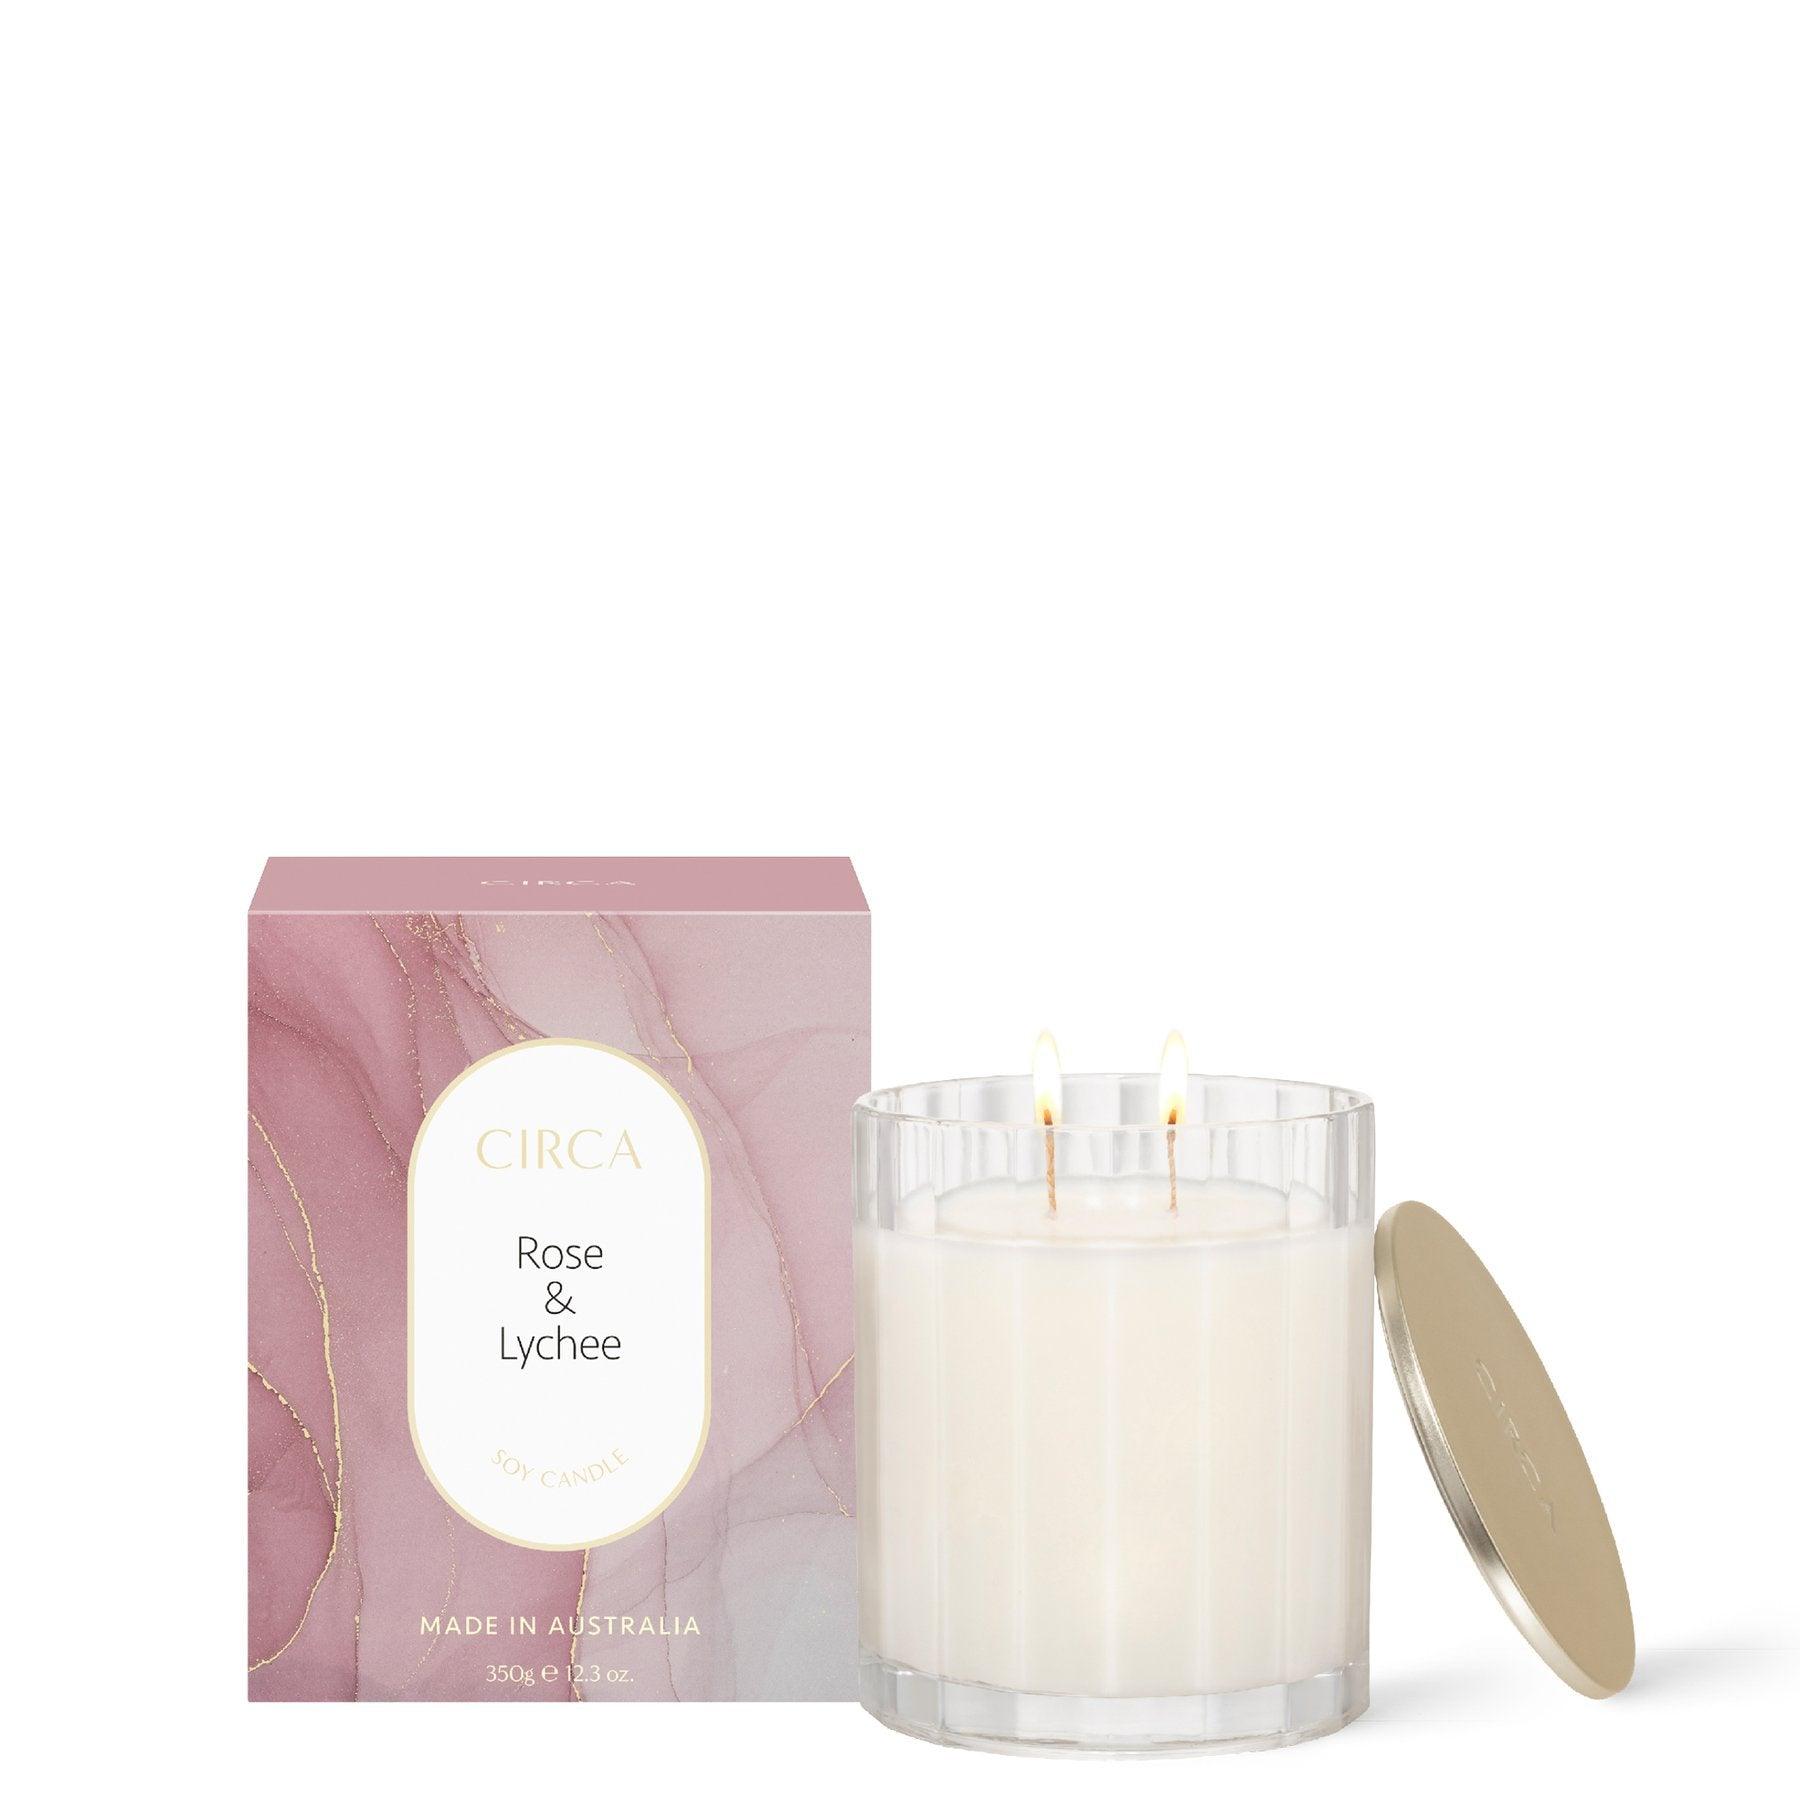 350g Candle - ROSE & LYCHEE - Handworks Nouveau Paperie